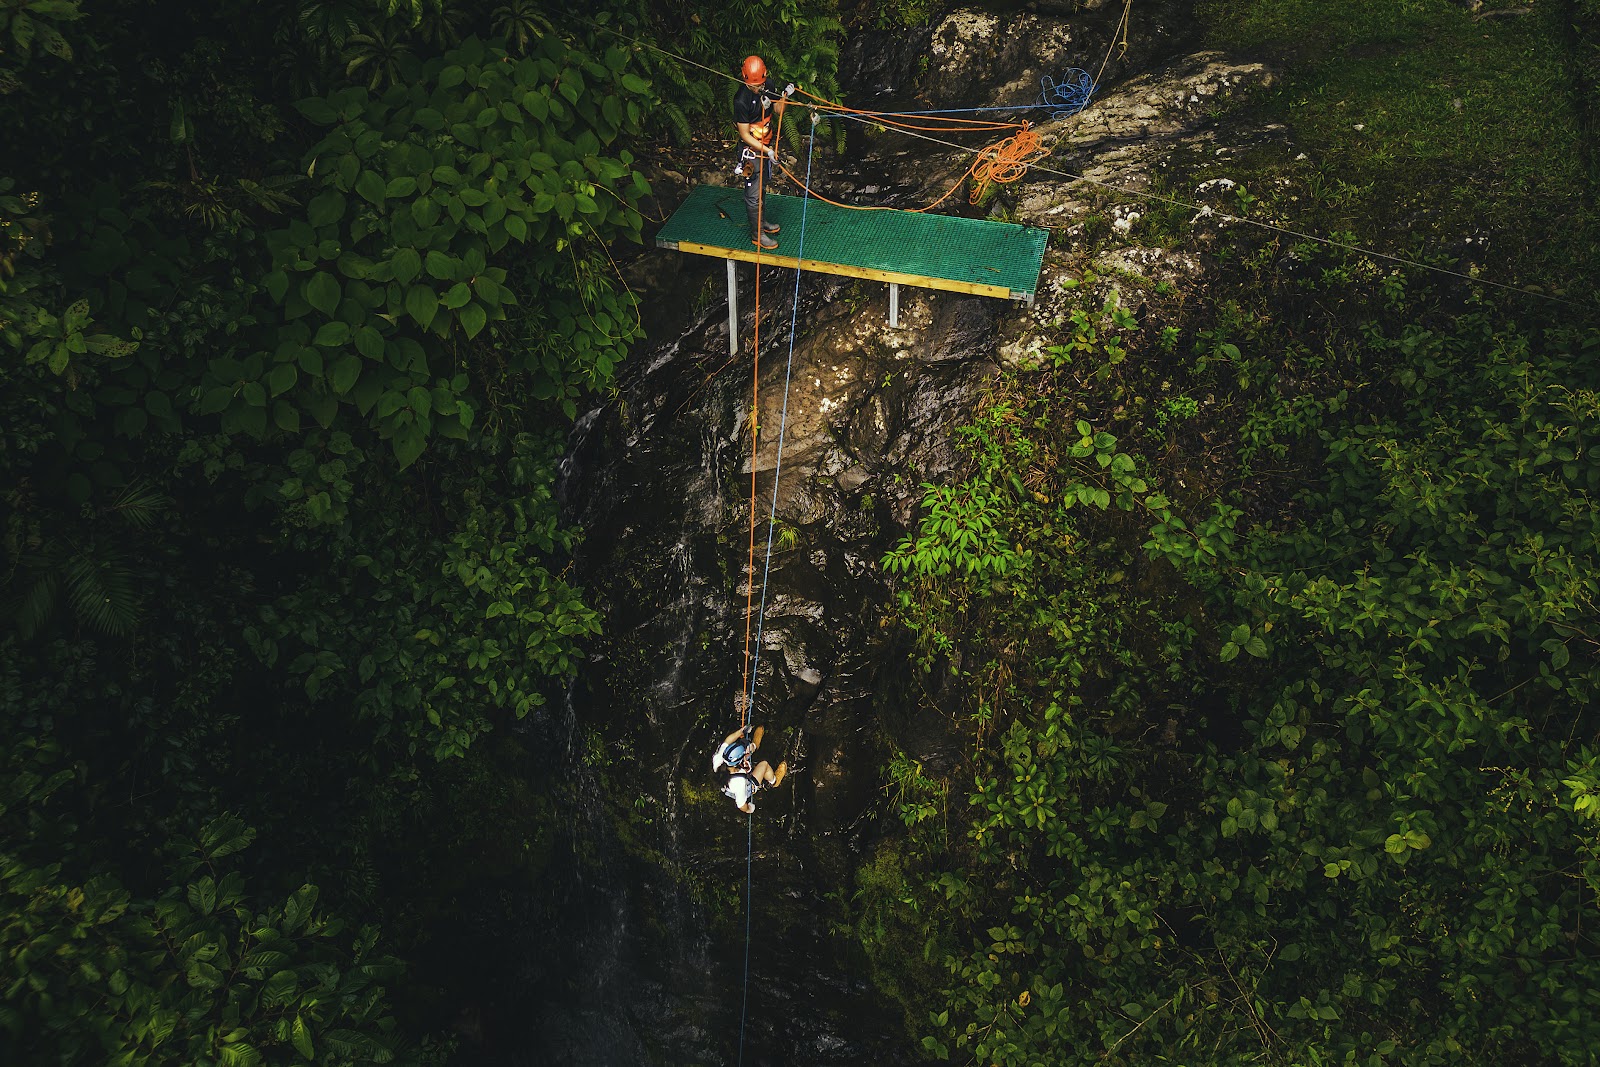 Enjoy The Private Reserve With An Eco Adventure Rappelling Experience